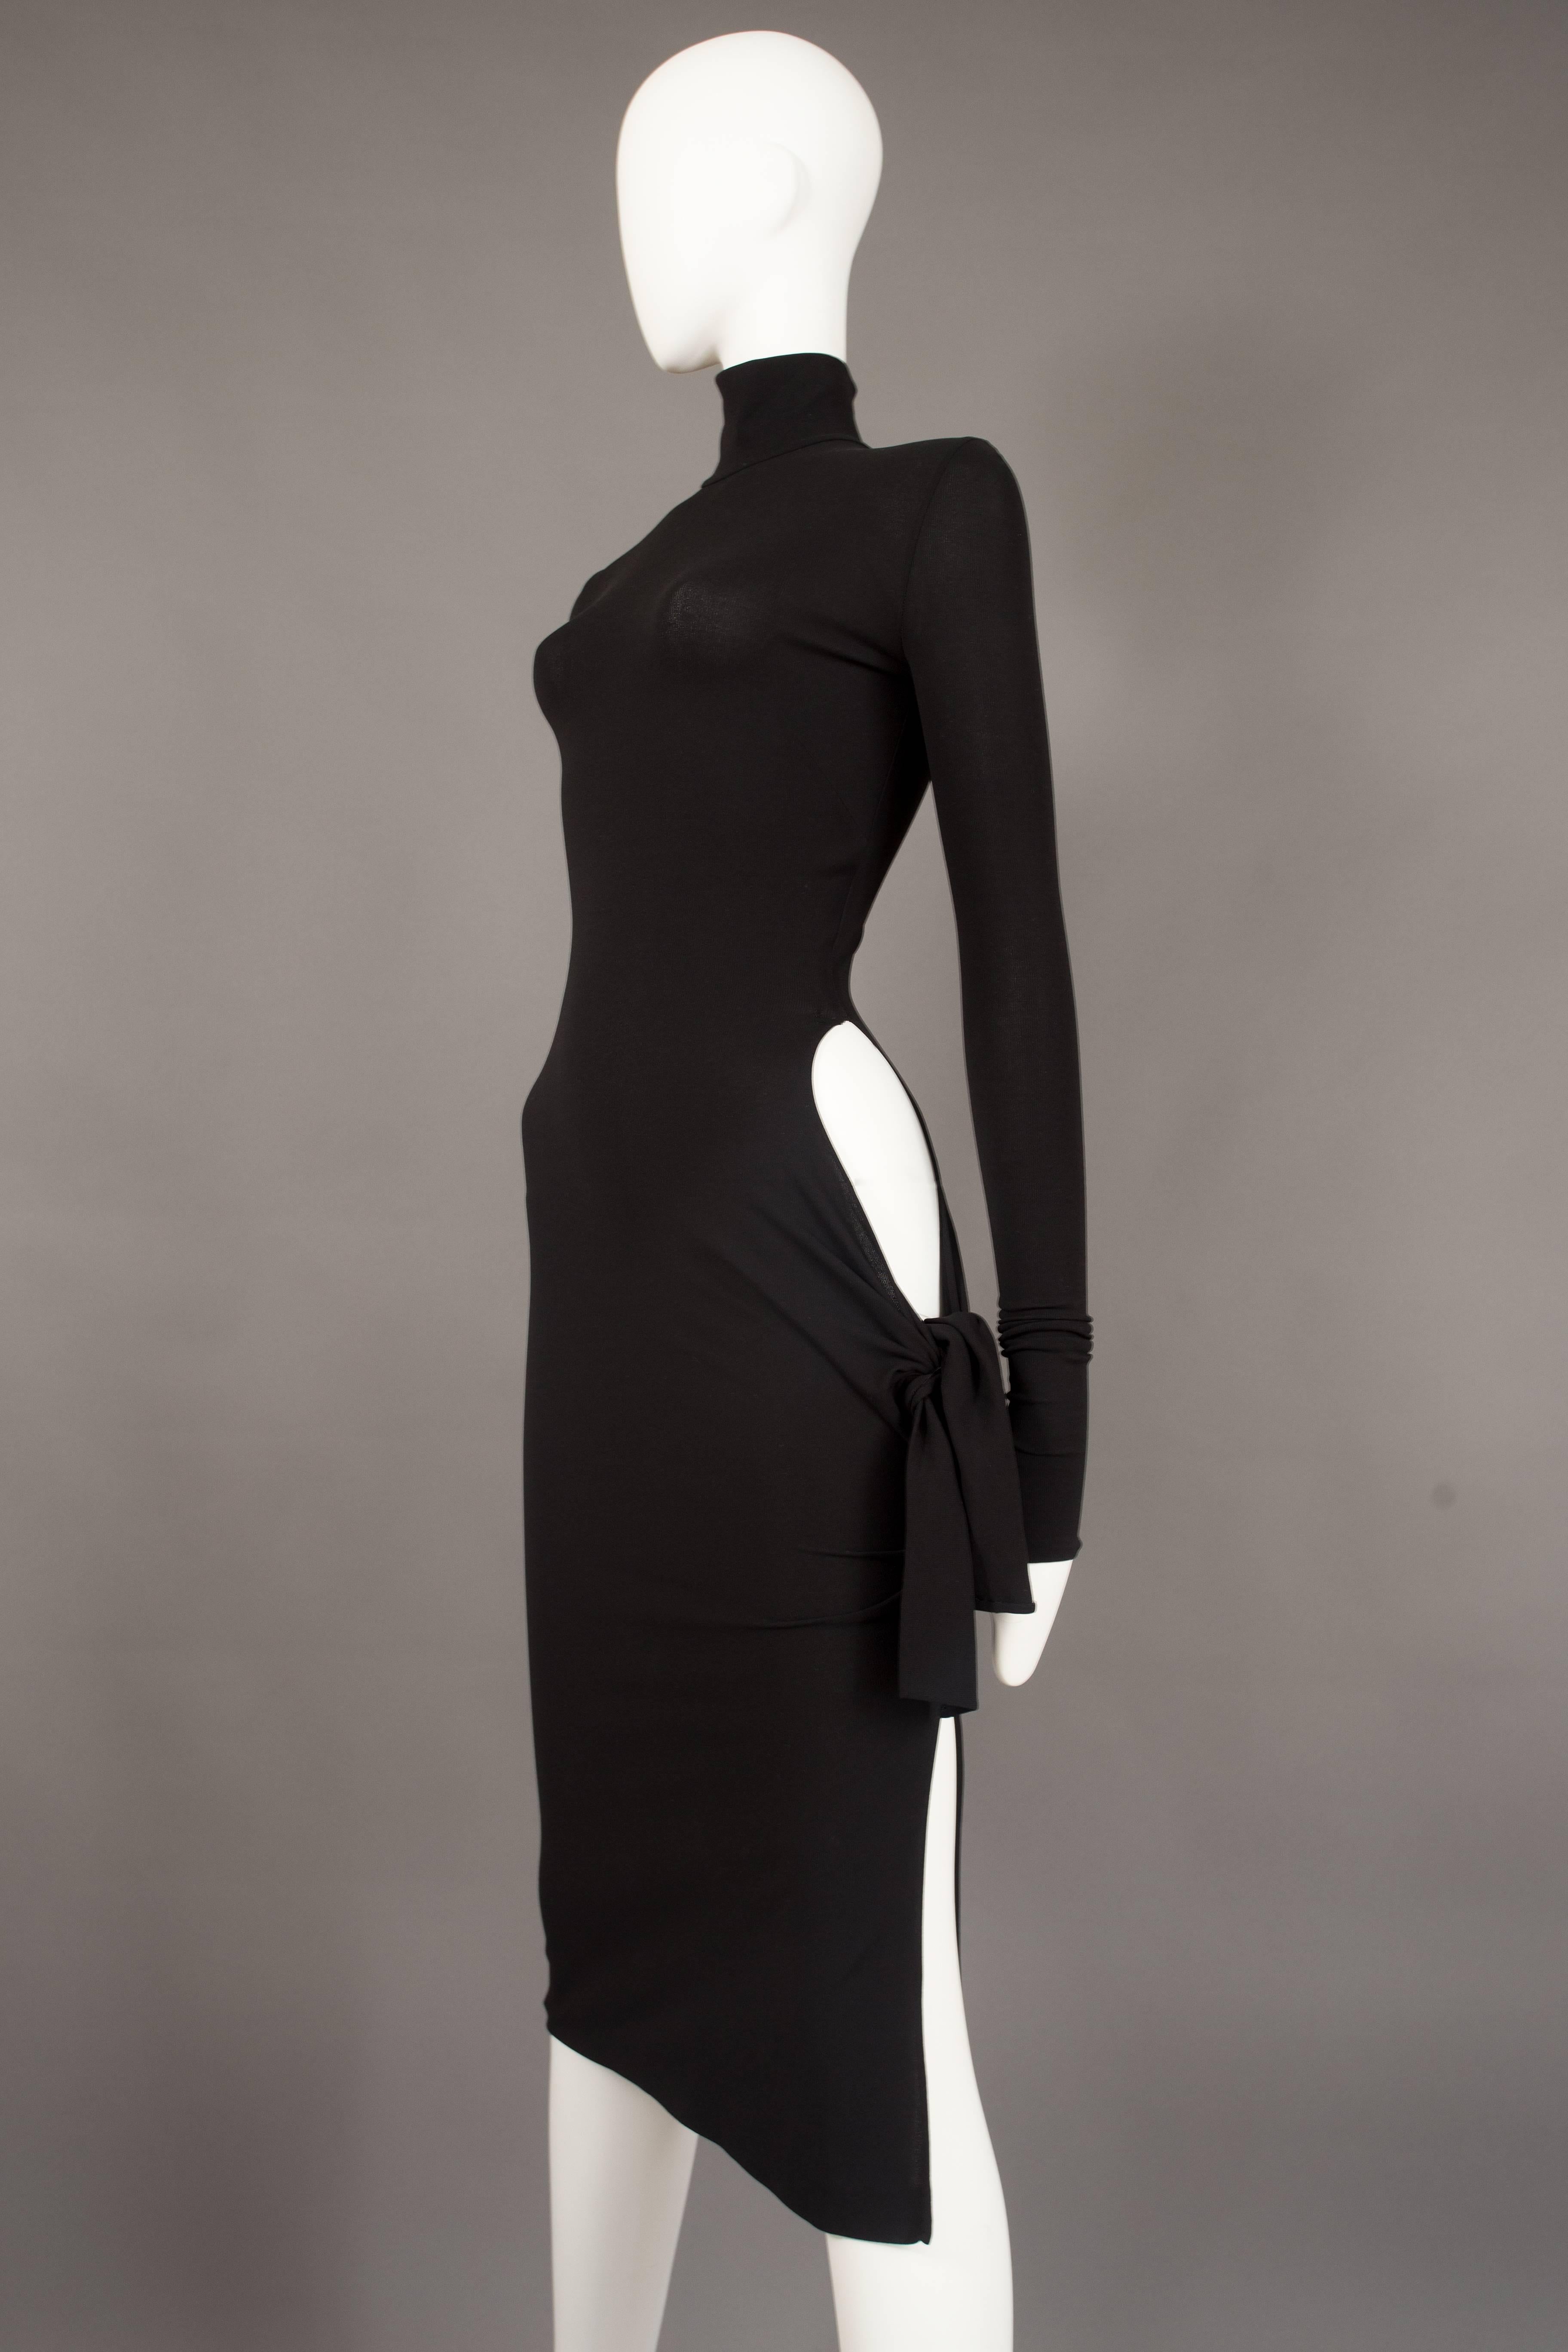 An iconic and rare Dolce & Gabbana bodycon evening dress from the spring summer 2001 collection. Black spandex-like stretch fabric, turtleneck, long fitted sleeves, invisible zip closure, high leg slit and circular cut on the lower hip with tie-up